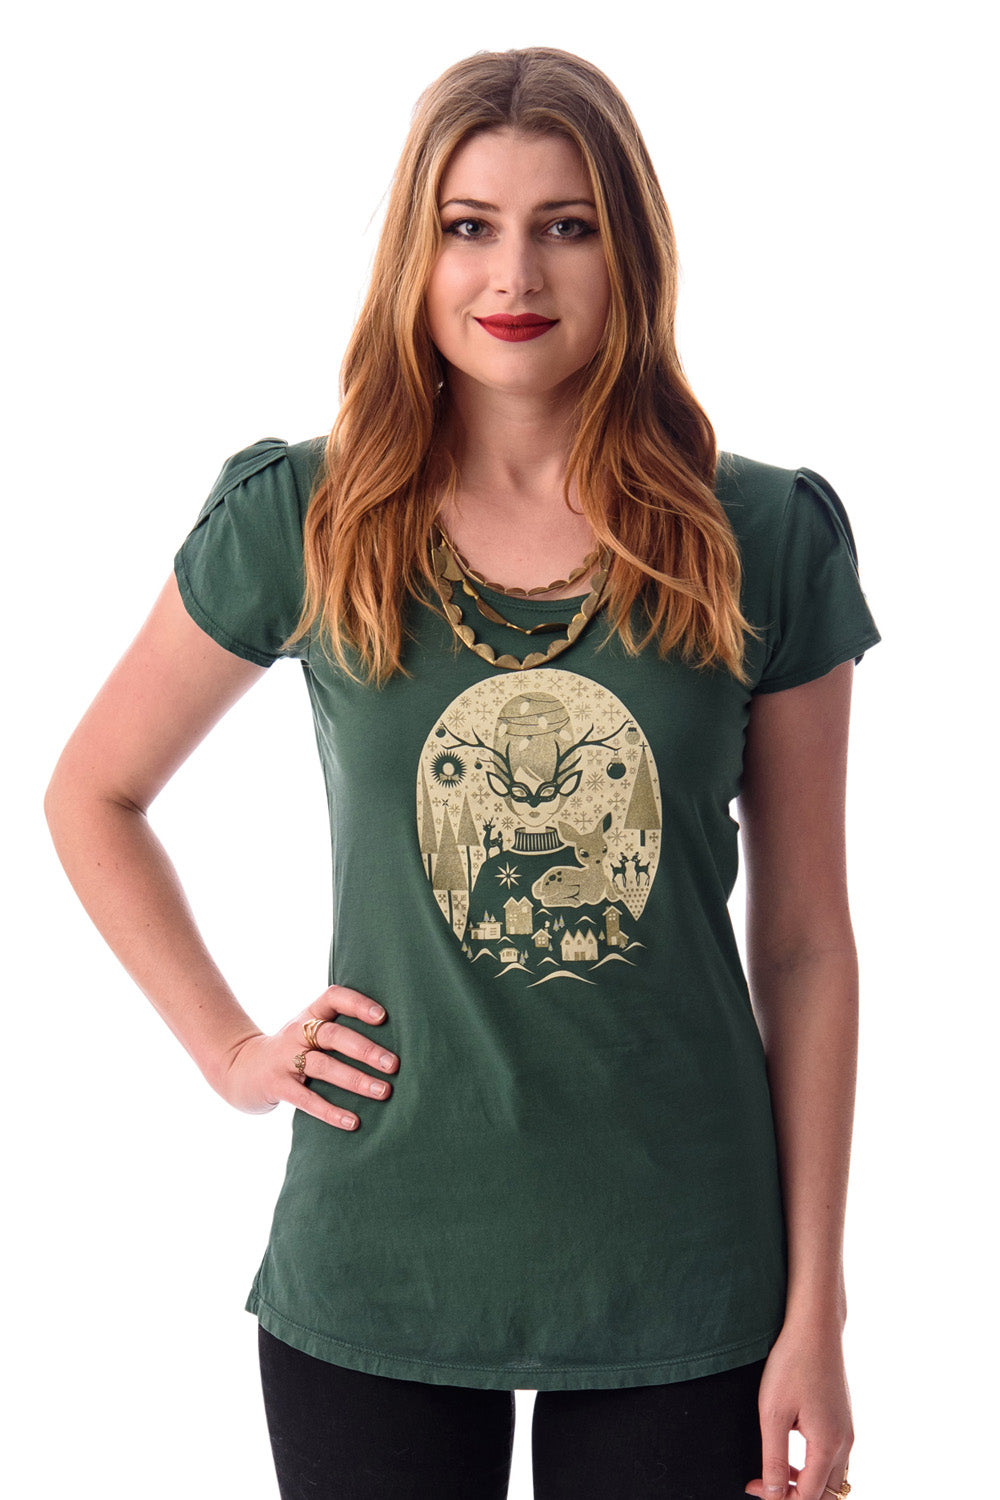 Blonde model wearing green tee with graphic of woman and baby deer